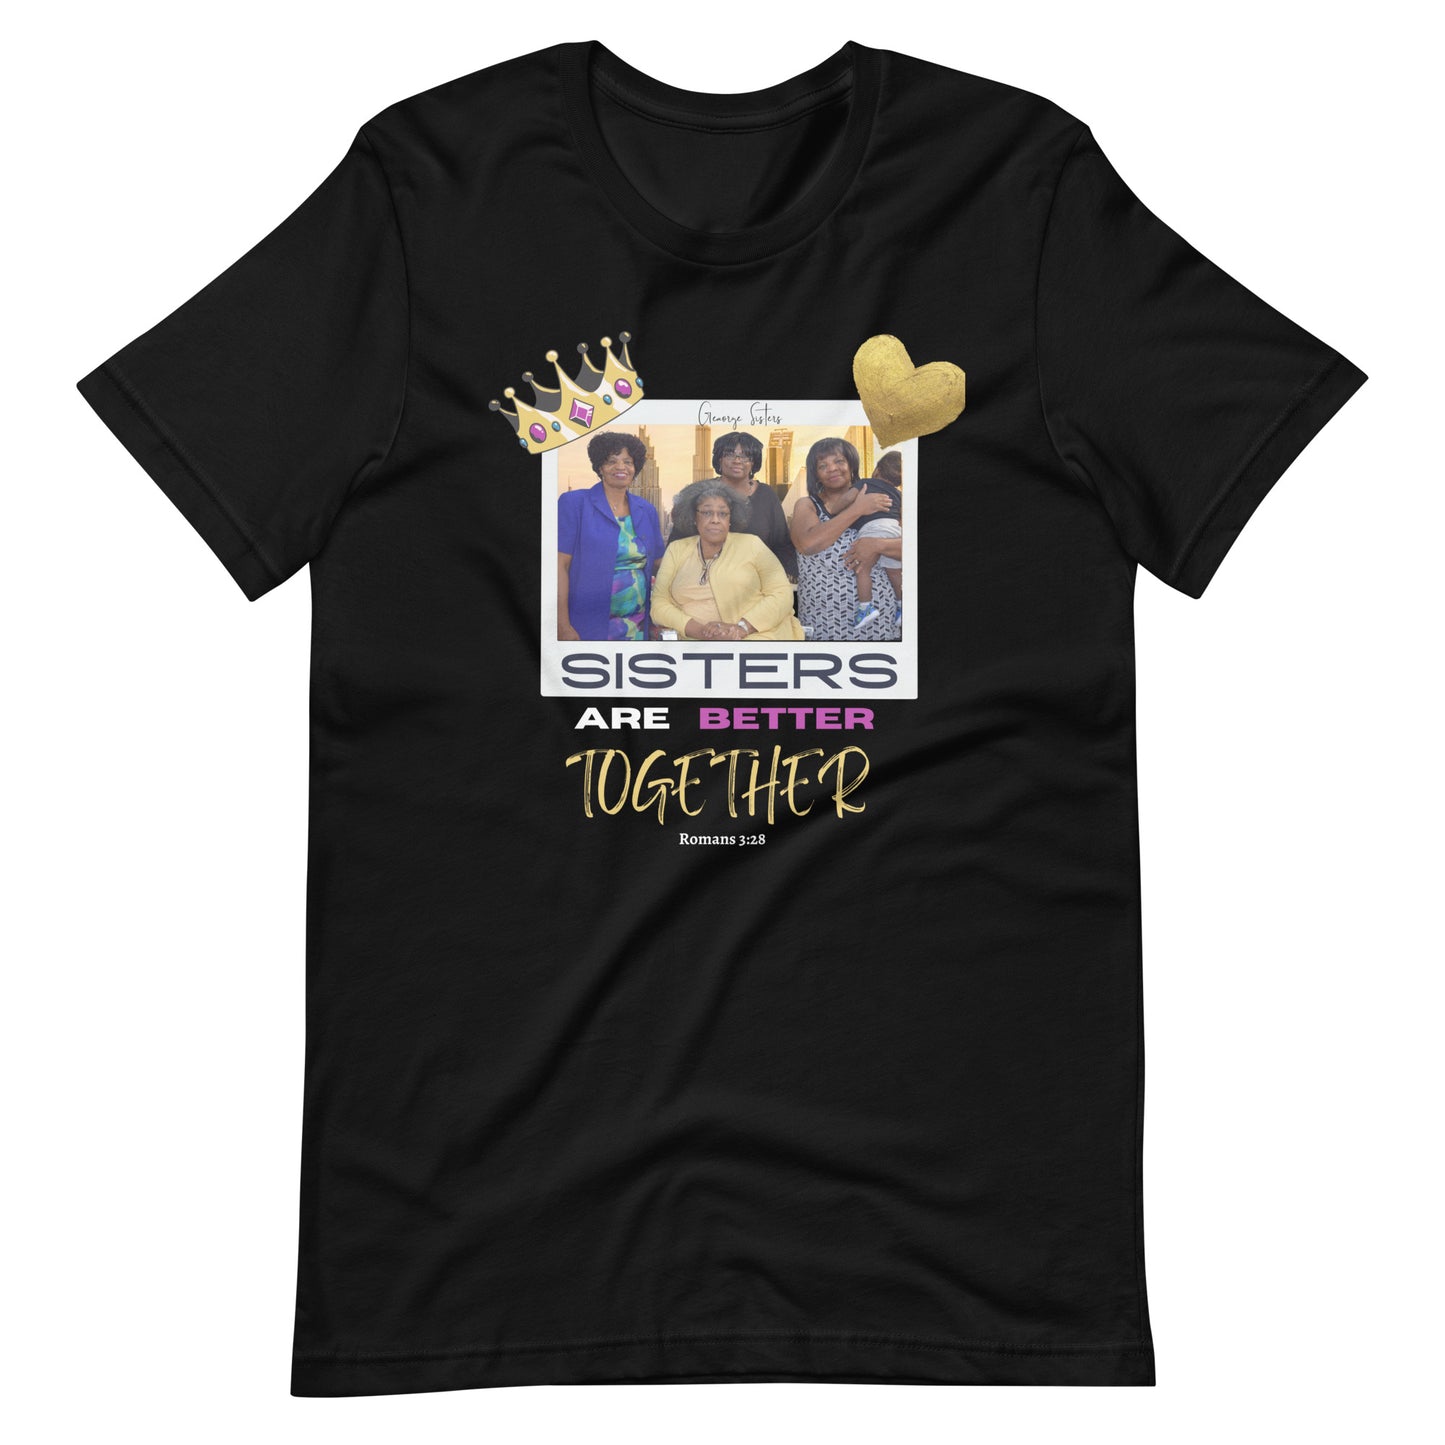 George Sisters Are Better Together t-shirt